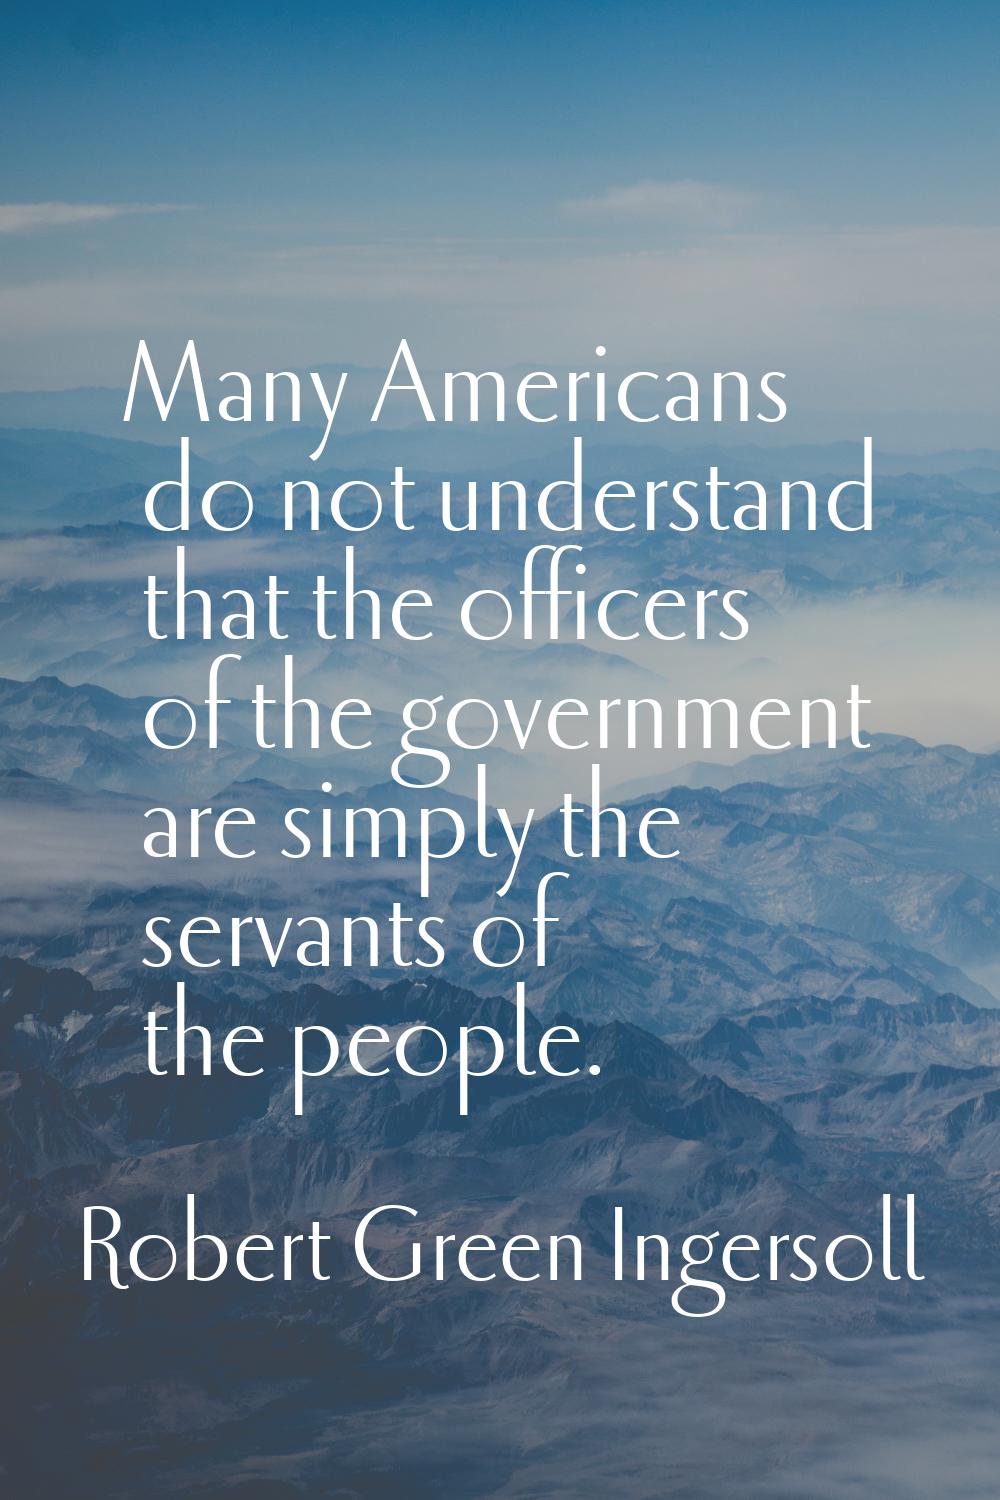 Many Americans do not understand that the officers of the government are simply the servants of the